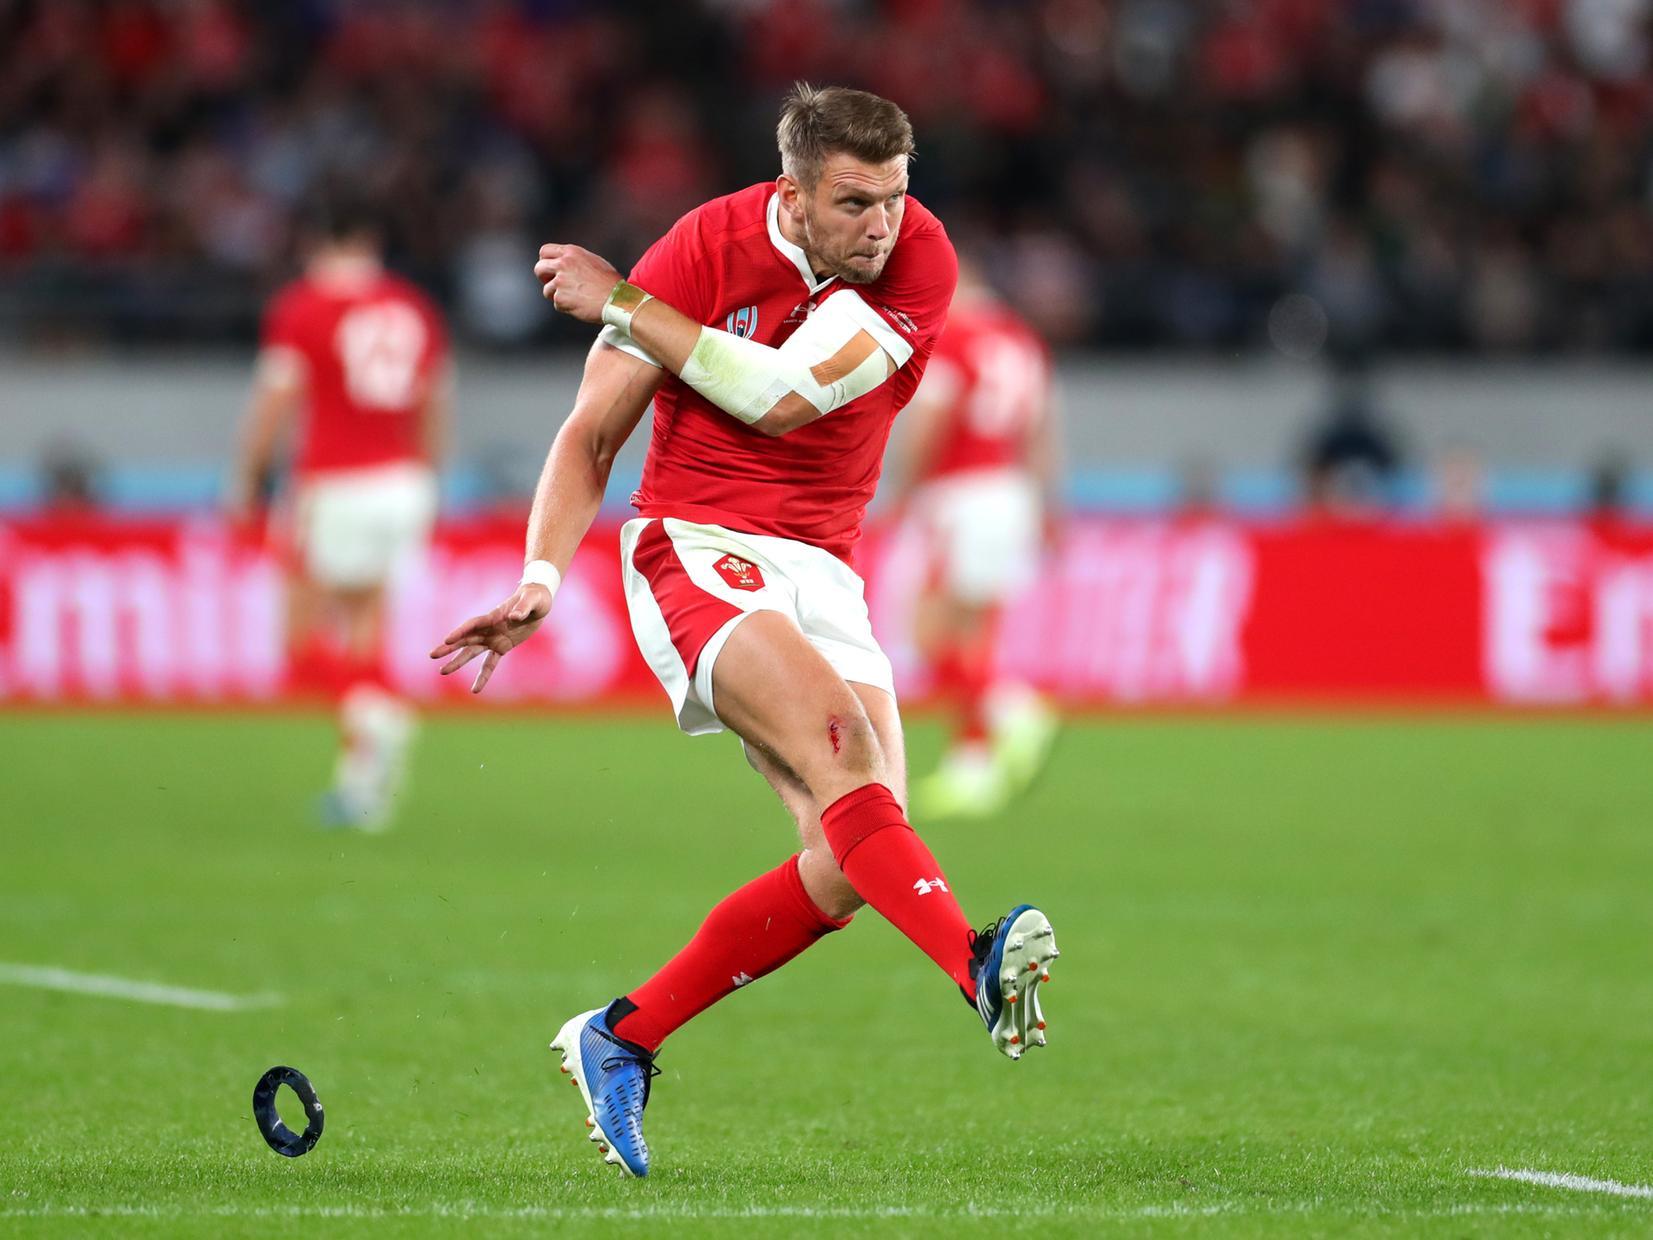 The fly-half has been at the World Cup with Wales, helping them to reach the semi-finals, where they lost to South Africa